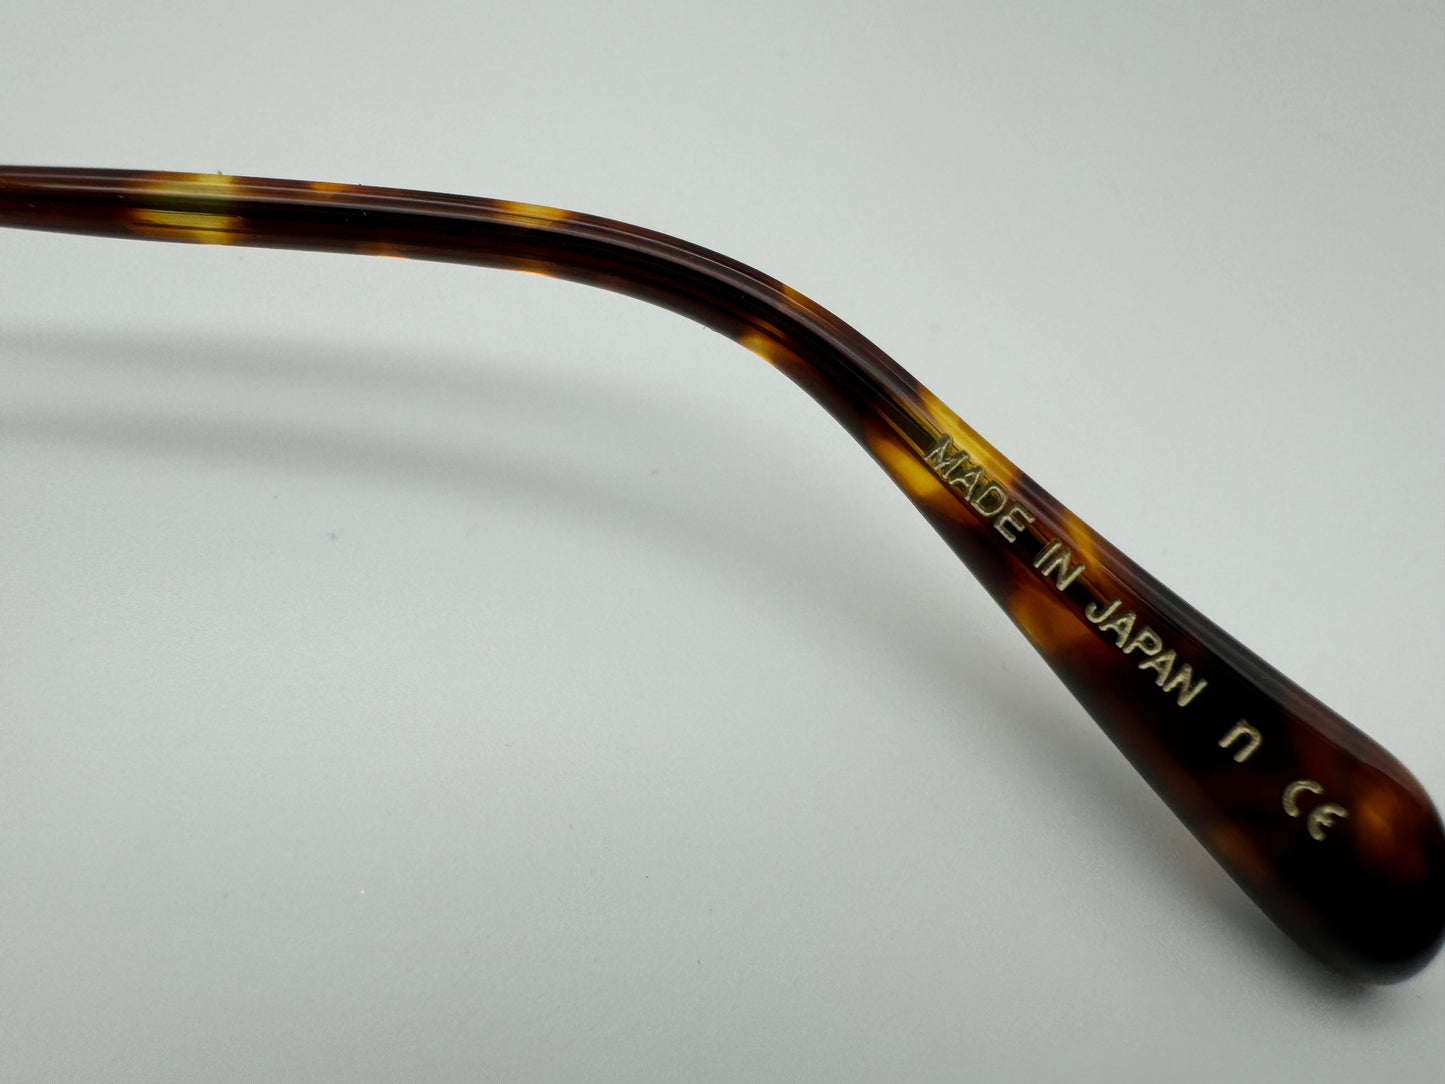 Oliver Peoples RIKSON 56mm Titanium OV 1266ST Antique Gold Green 528471 none polarized Preowned